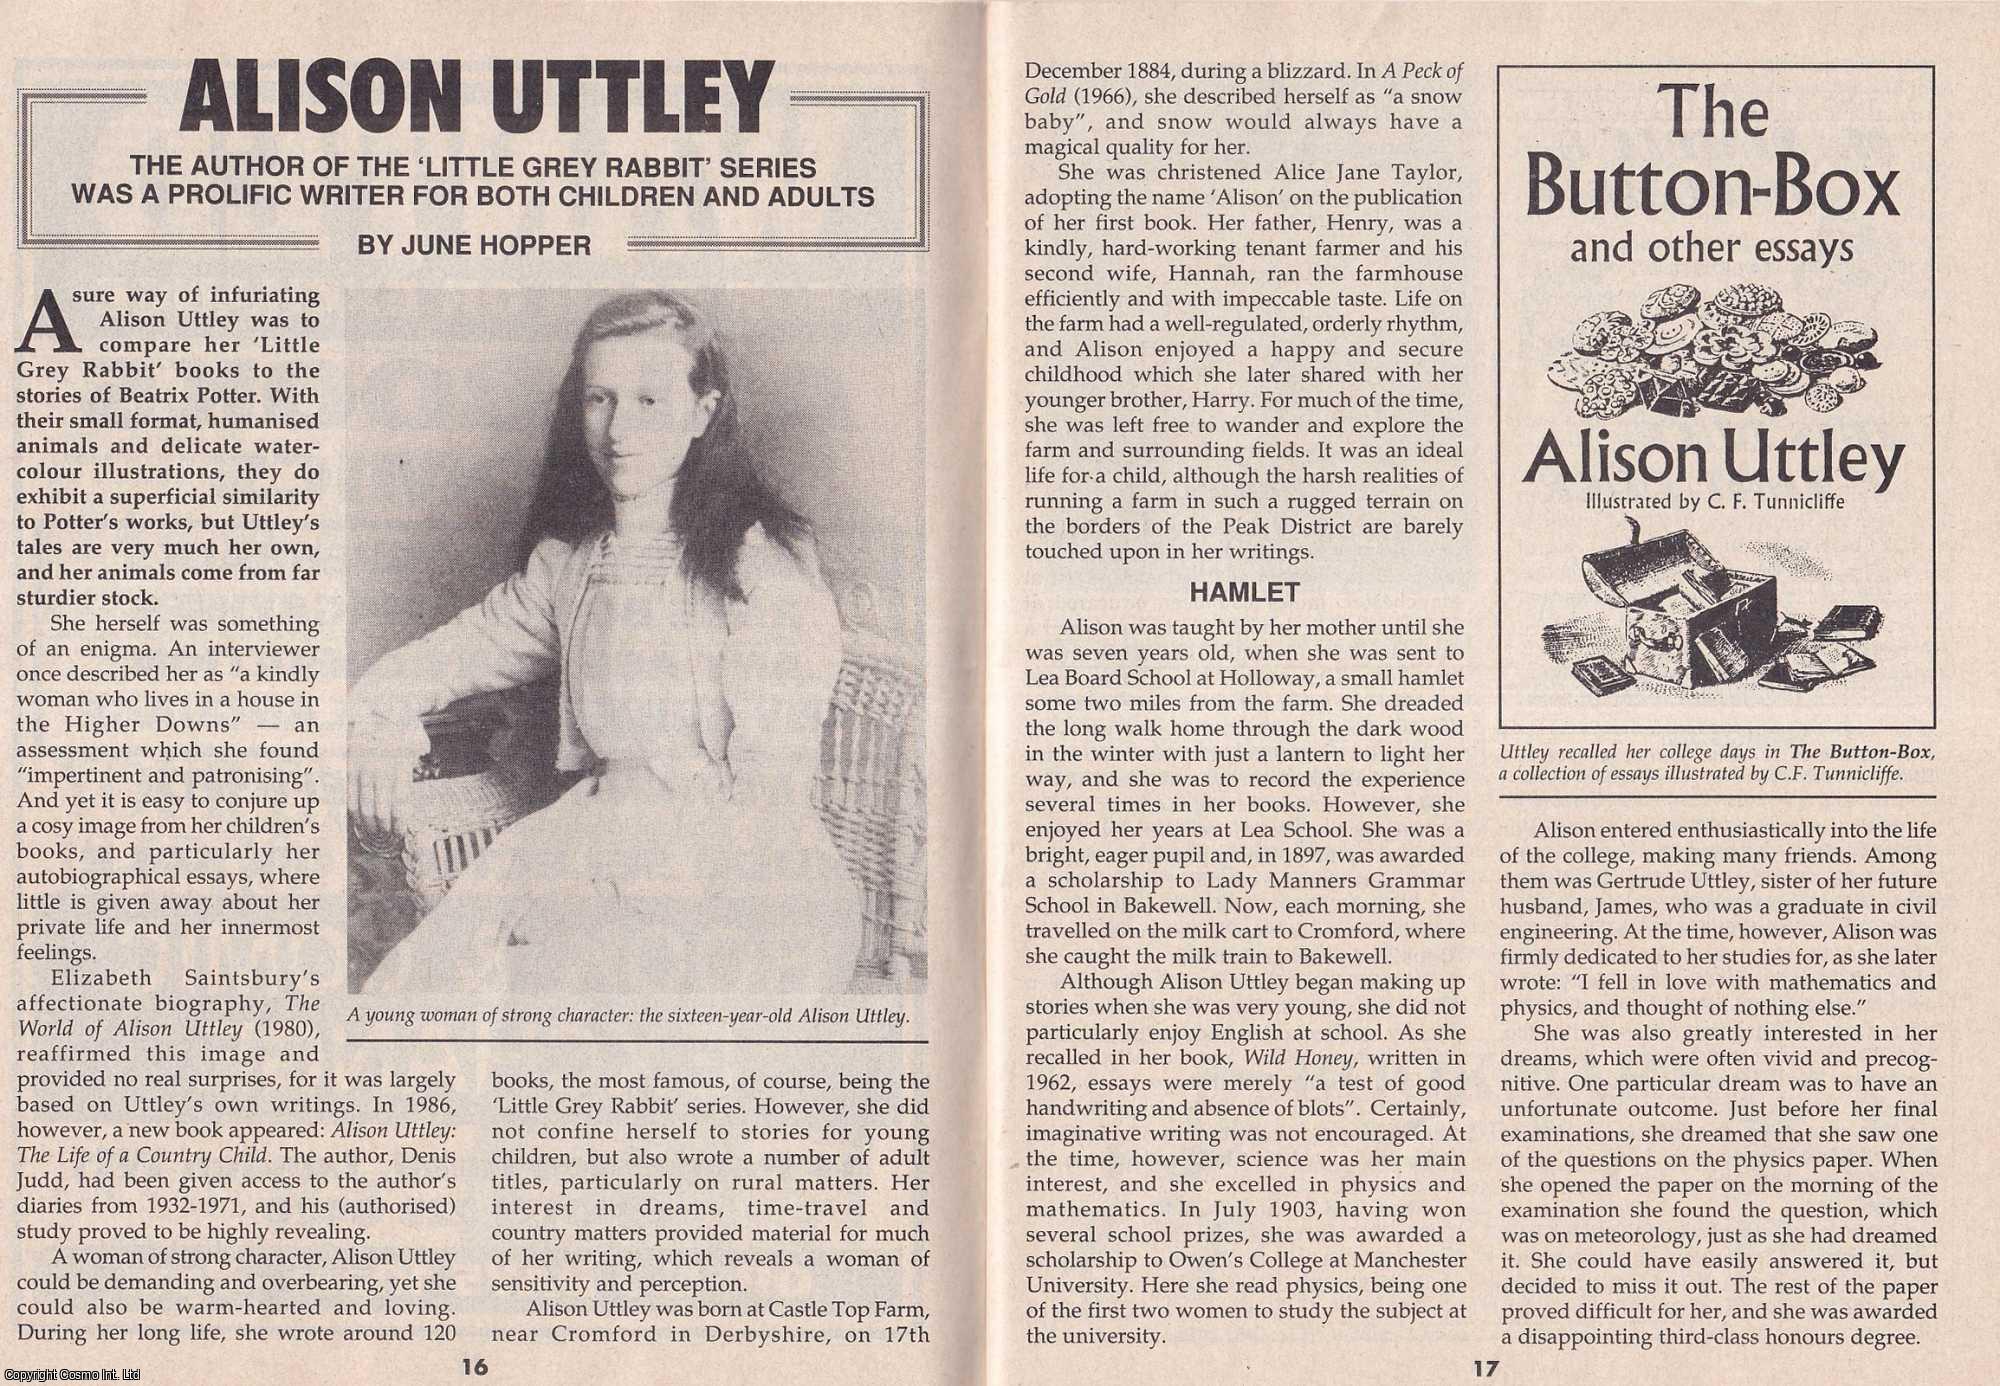 June Hopper - Alison Uttley : Author of The Little Grey Rabbit Series was a Prolific Writer for both Children & Adults. This is an original article separated from an issue of The Book & Magazine Collector publication.